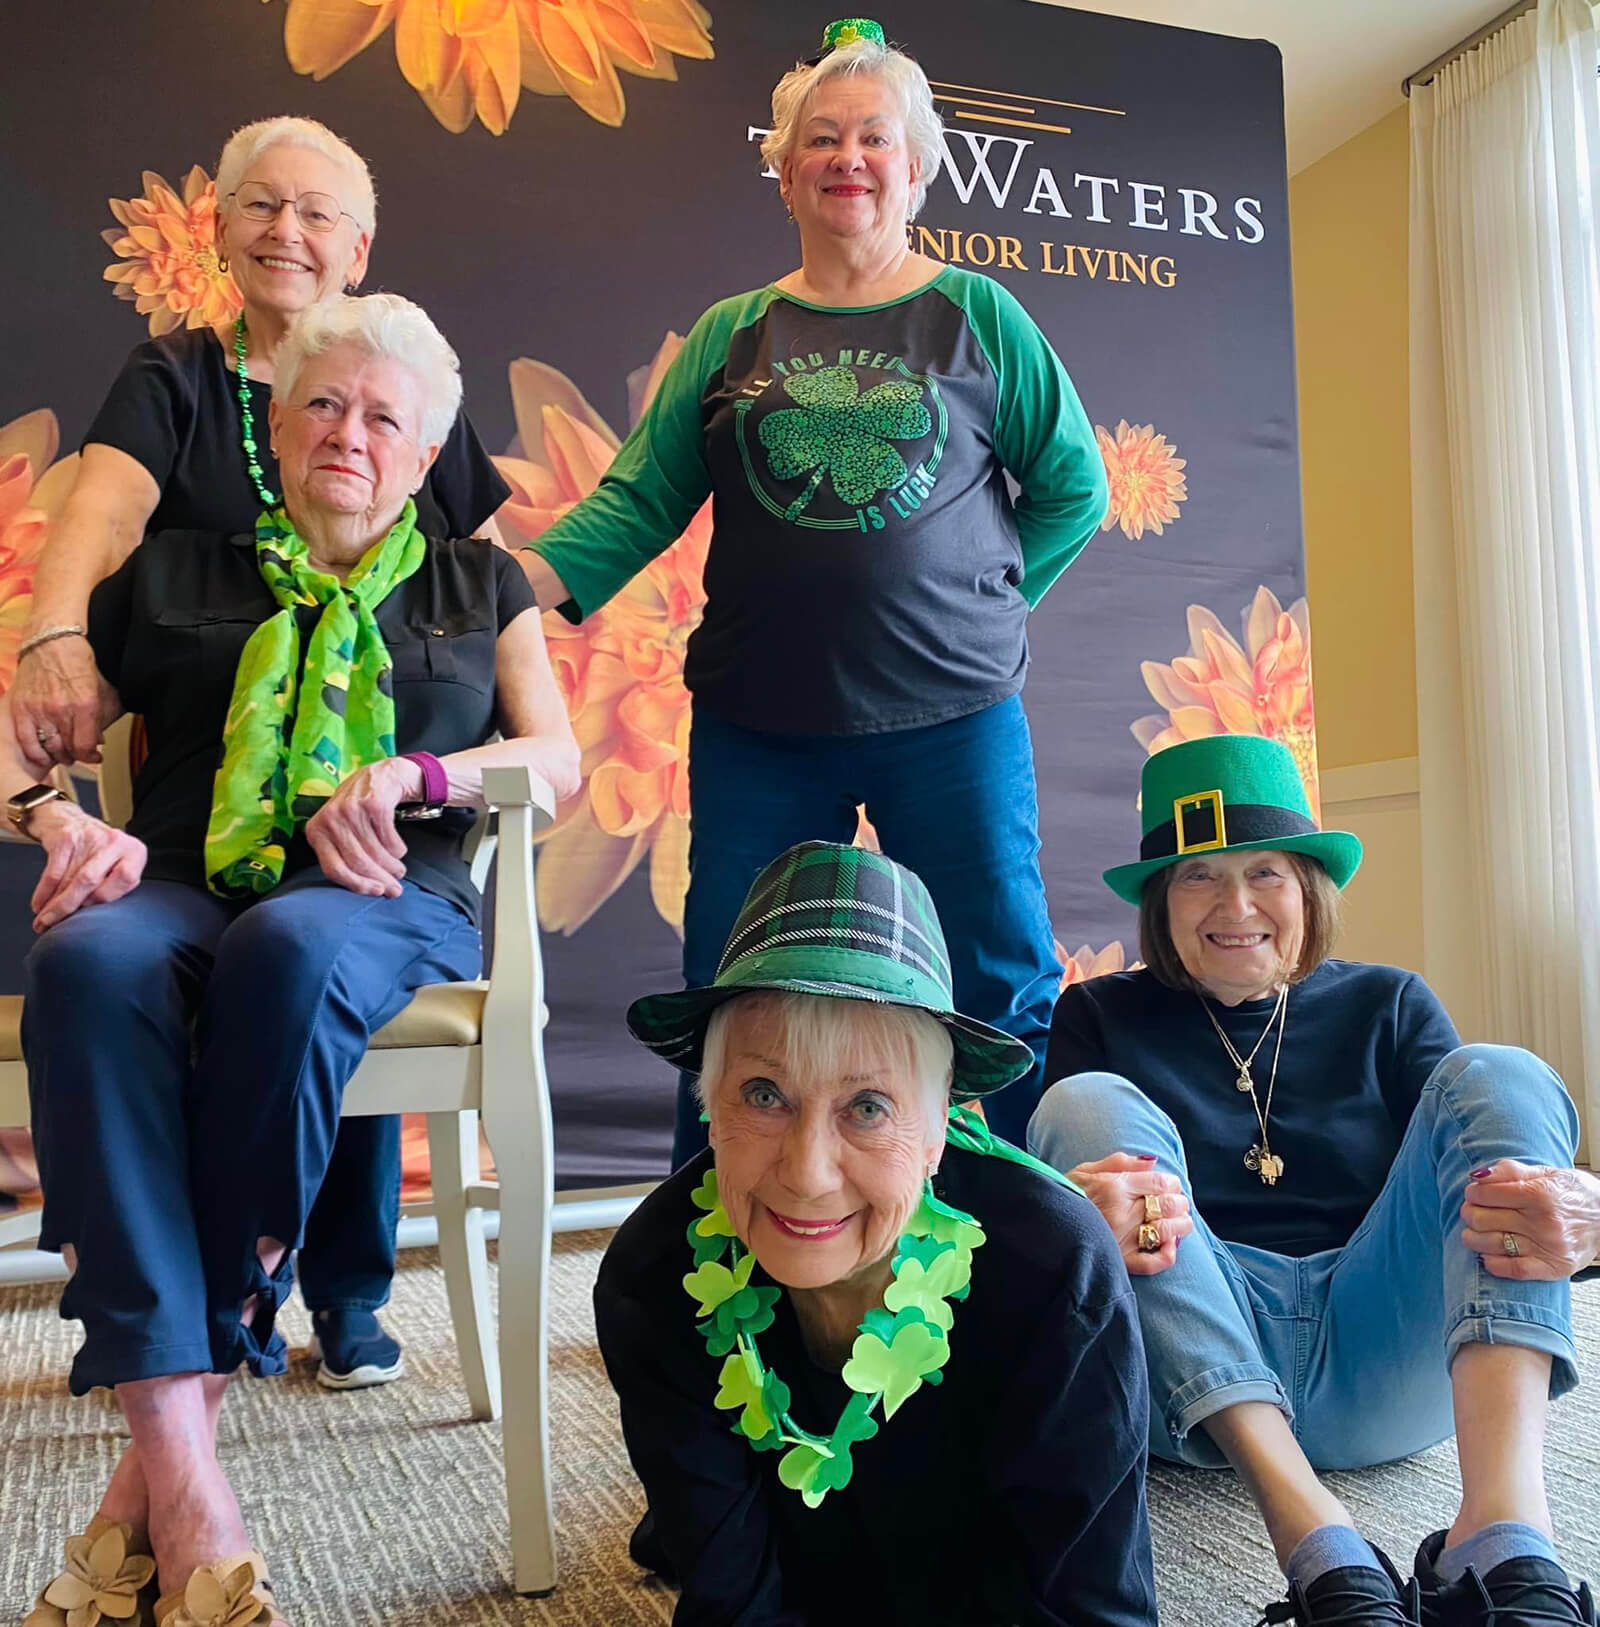 Residents of The Waters on Mayowood celebrating St. Patrick's Day with festive attire, reflecting the community's lively event calendar.